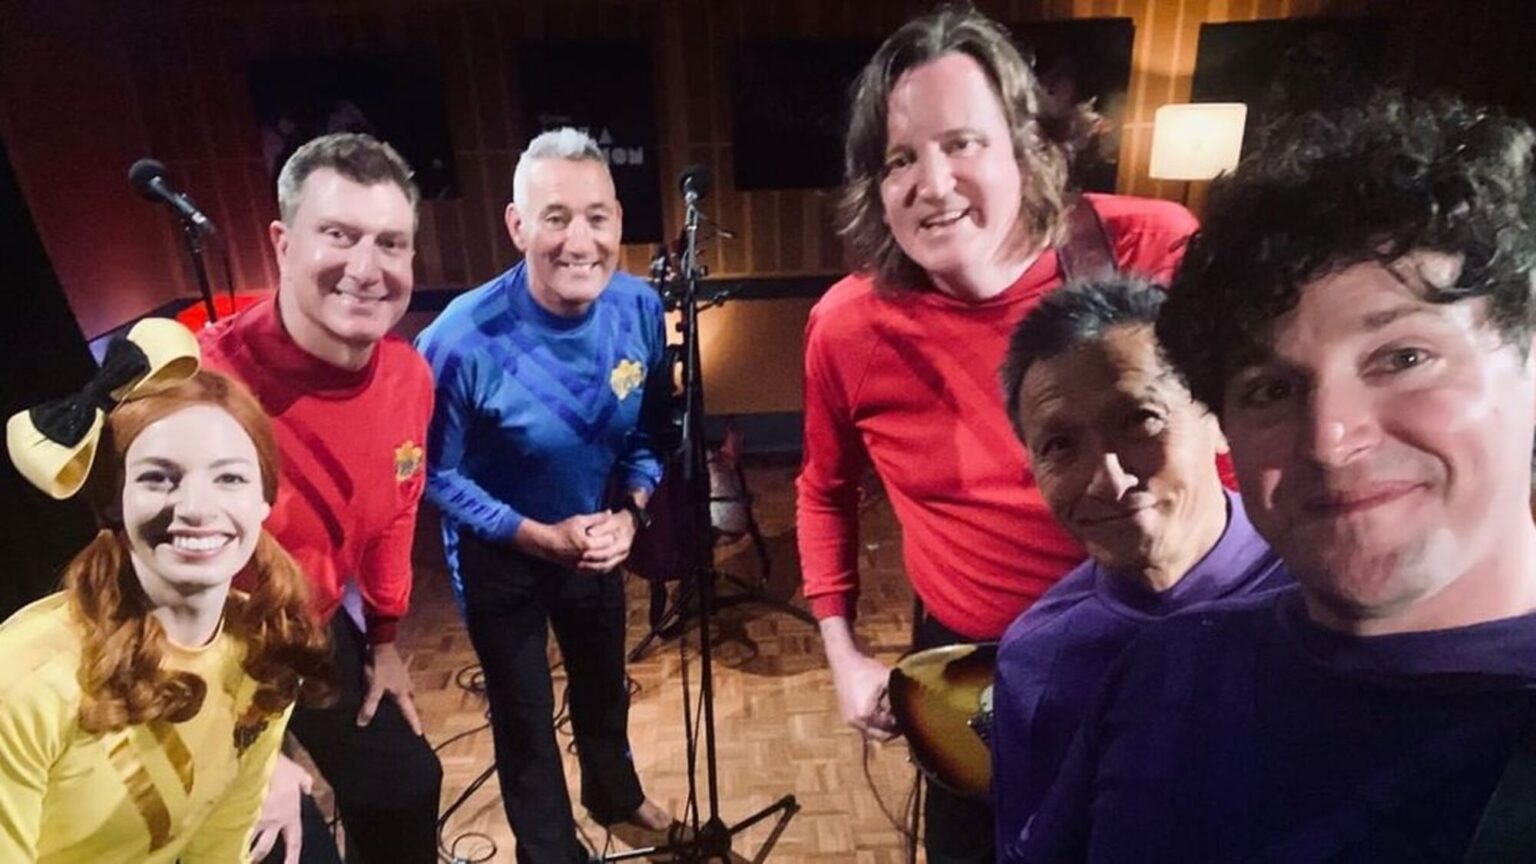 Get ready for the nostalgia. The original Wiggles got together to mash up their hit single "Fruit Salad" with some indie rock. Hear it for yourself here.